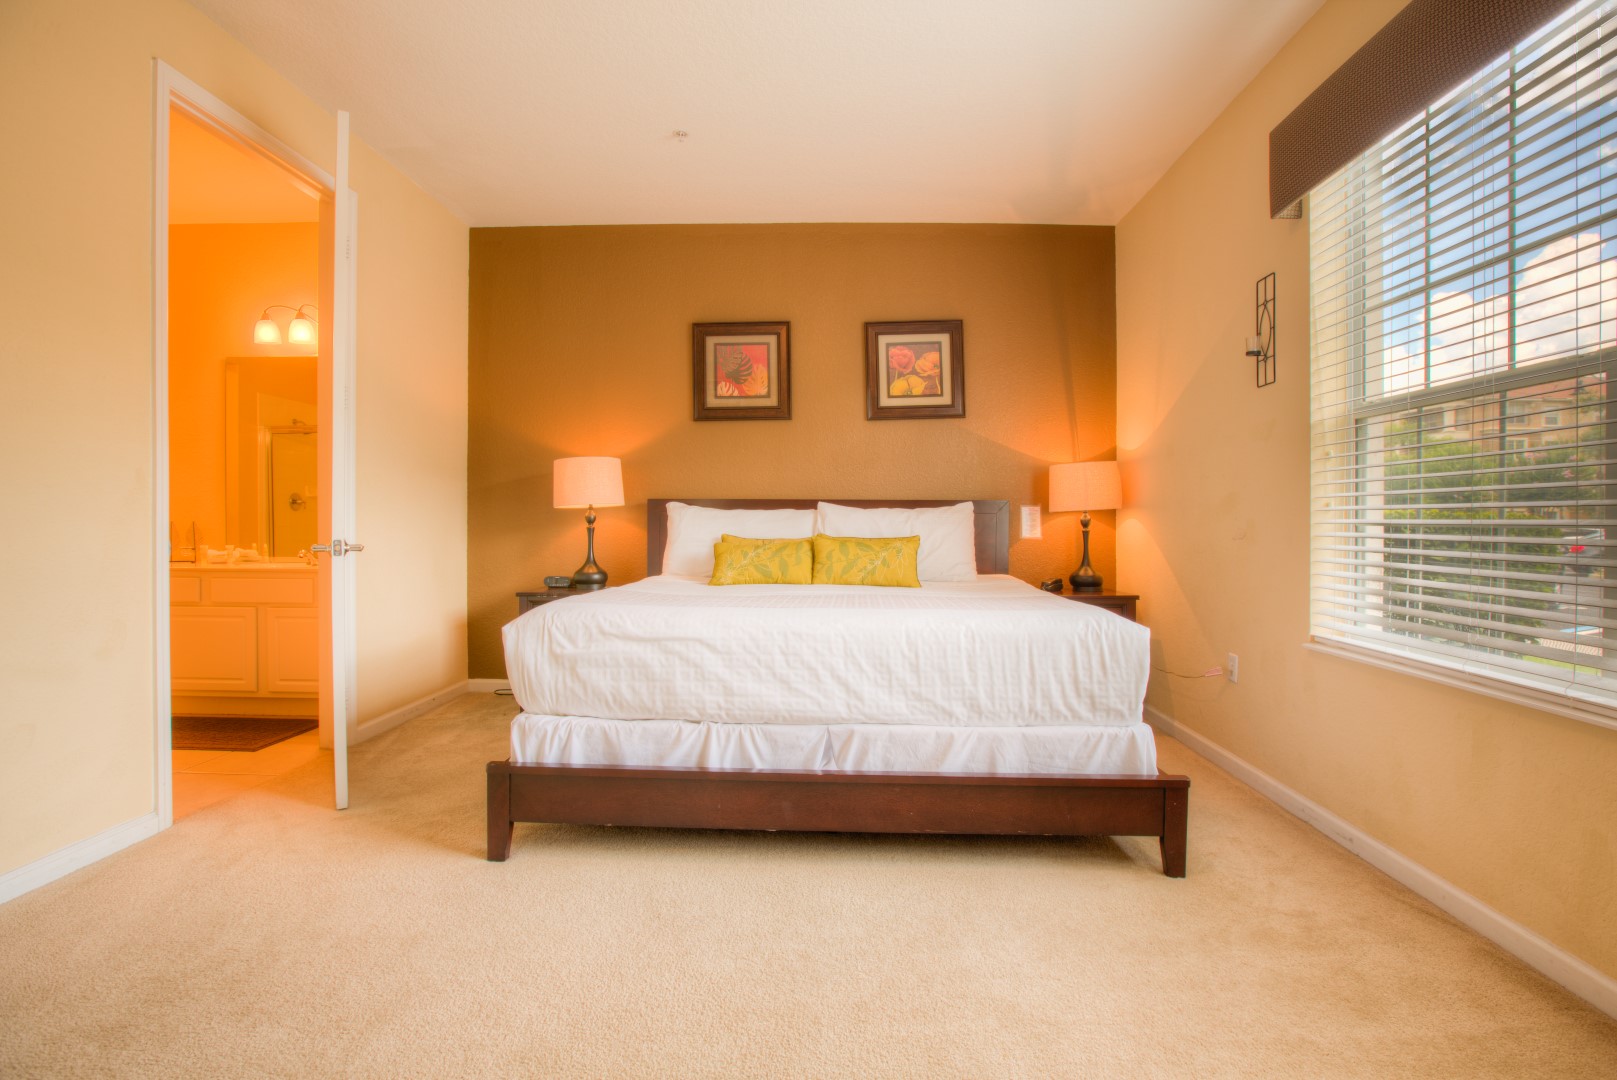 Relaxing bedroom of the condo in Orlando - Rustic colored wall to warm up the space. - Plush bedding with neat and clean linen - Stunningly carpeted floor - Attached bathroom for your convenience - Bedside window to rise with lovely outside views